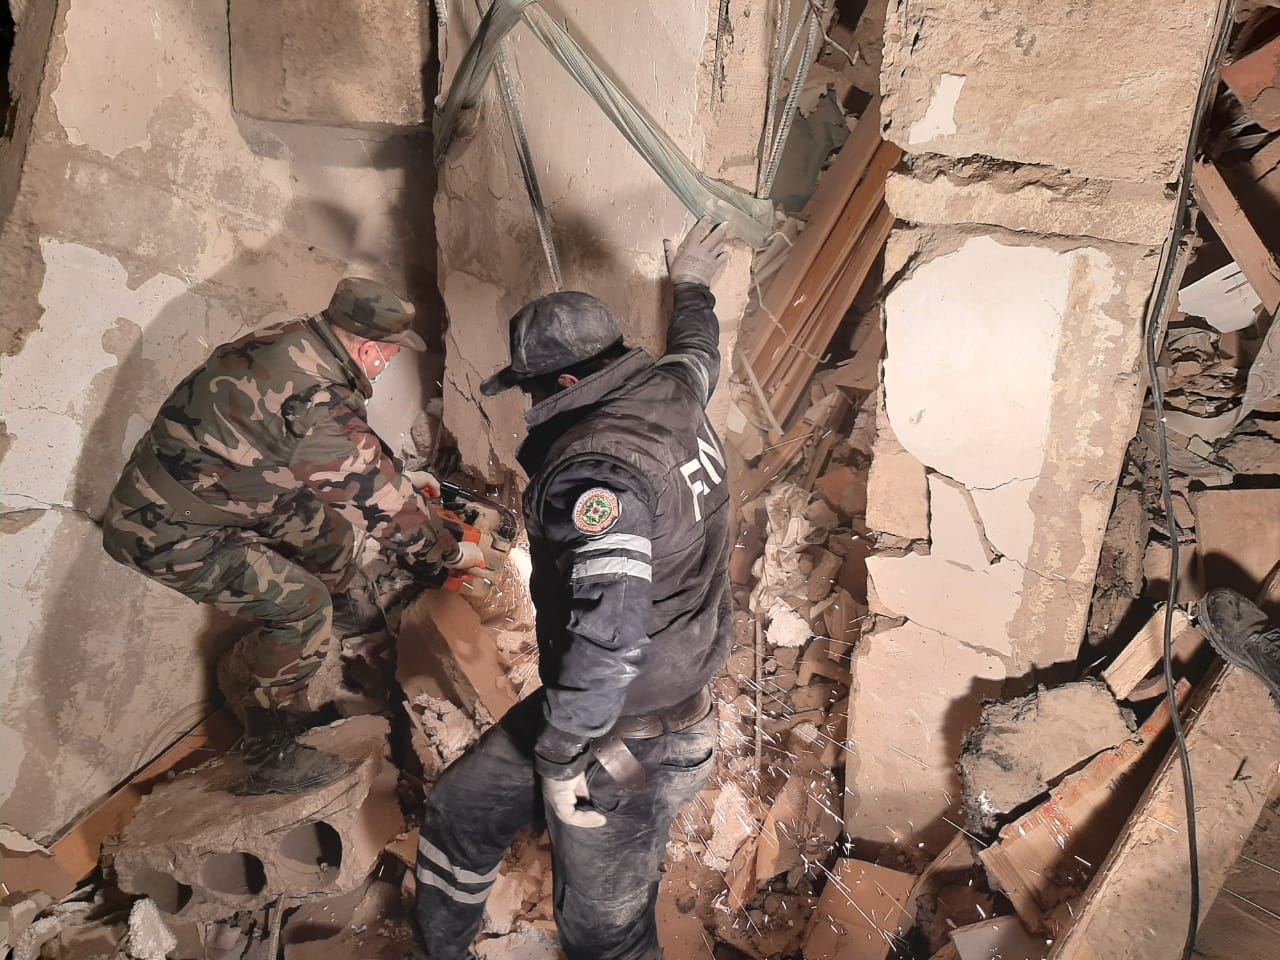 Body of one person recovered from rubble of destroyed house in Azerbaijan's Khirdalan (PHOTO/VIDEO) (UPDATE)